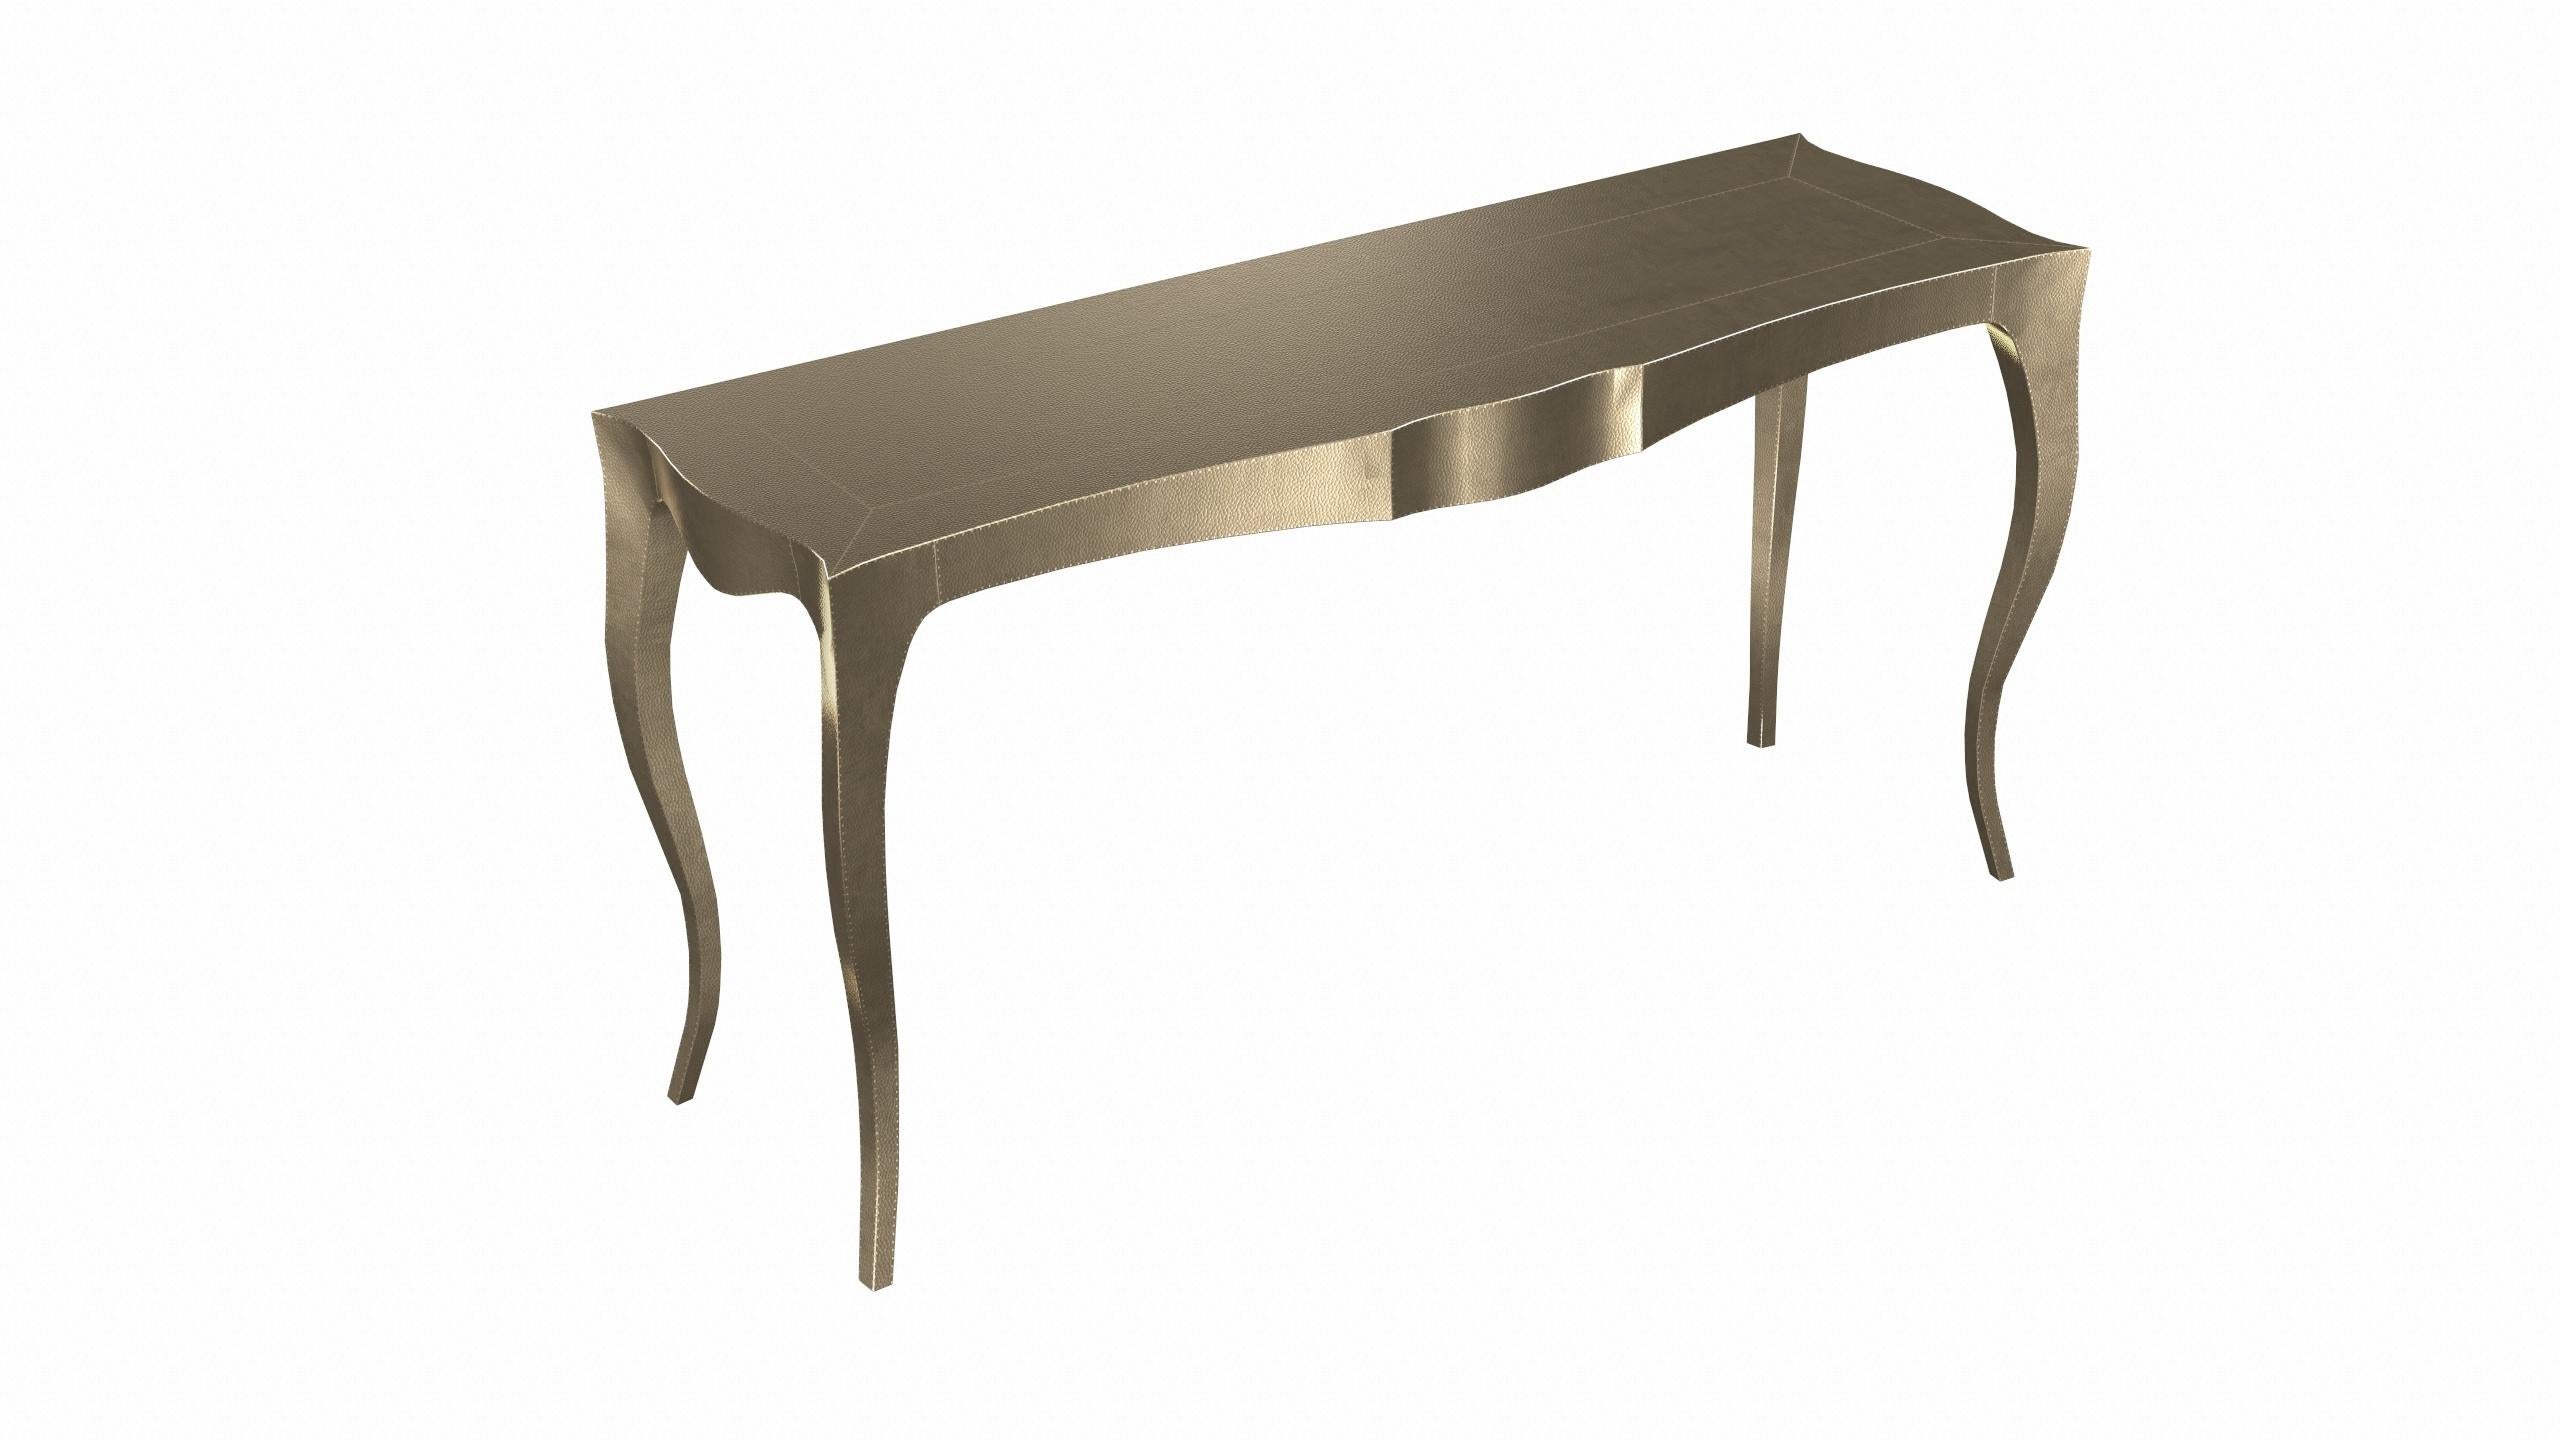 Other Louise Console Art Deco Conference Tables Mid. Hammered Brass by Paul Mathieu   For Sale